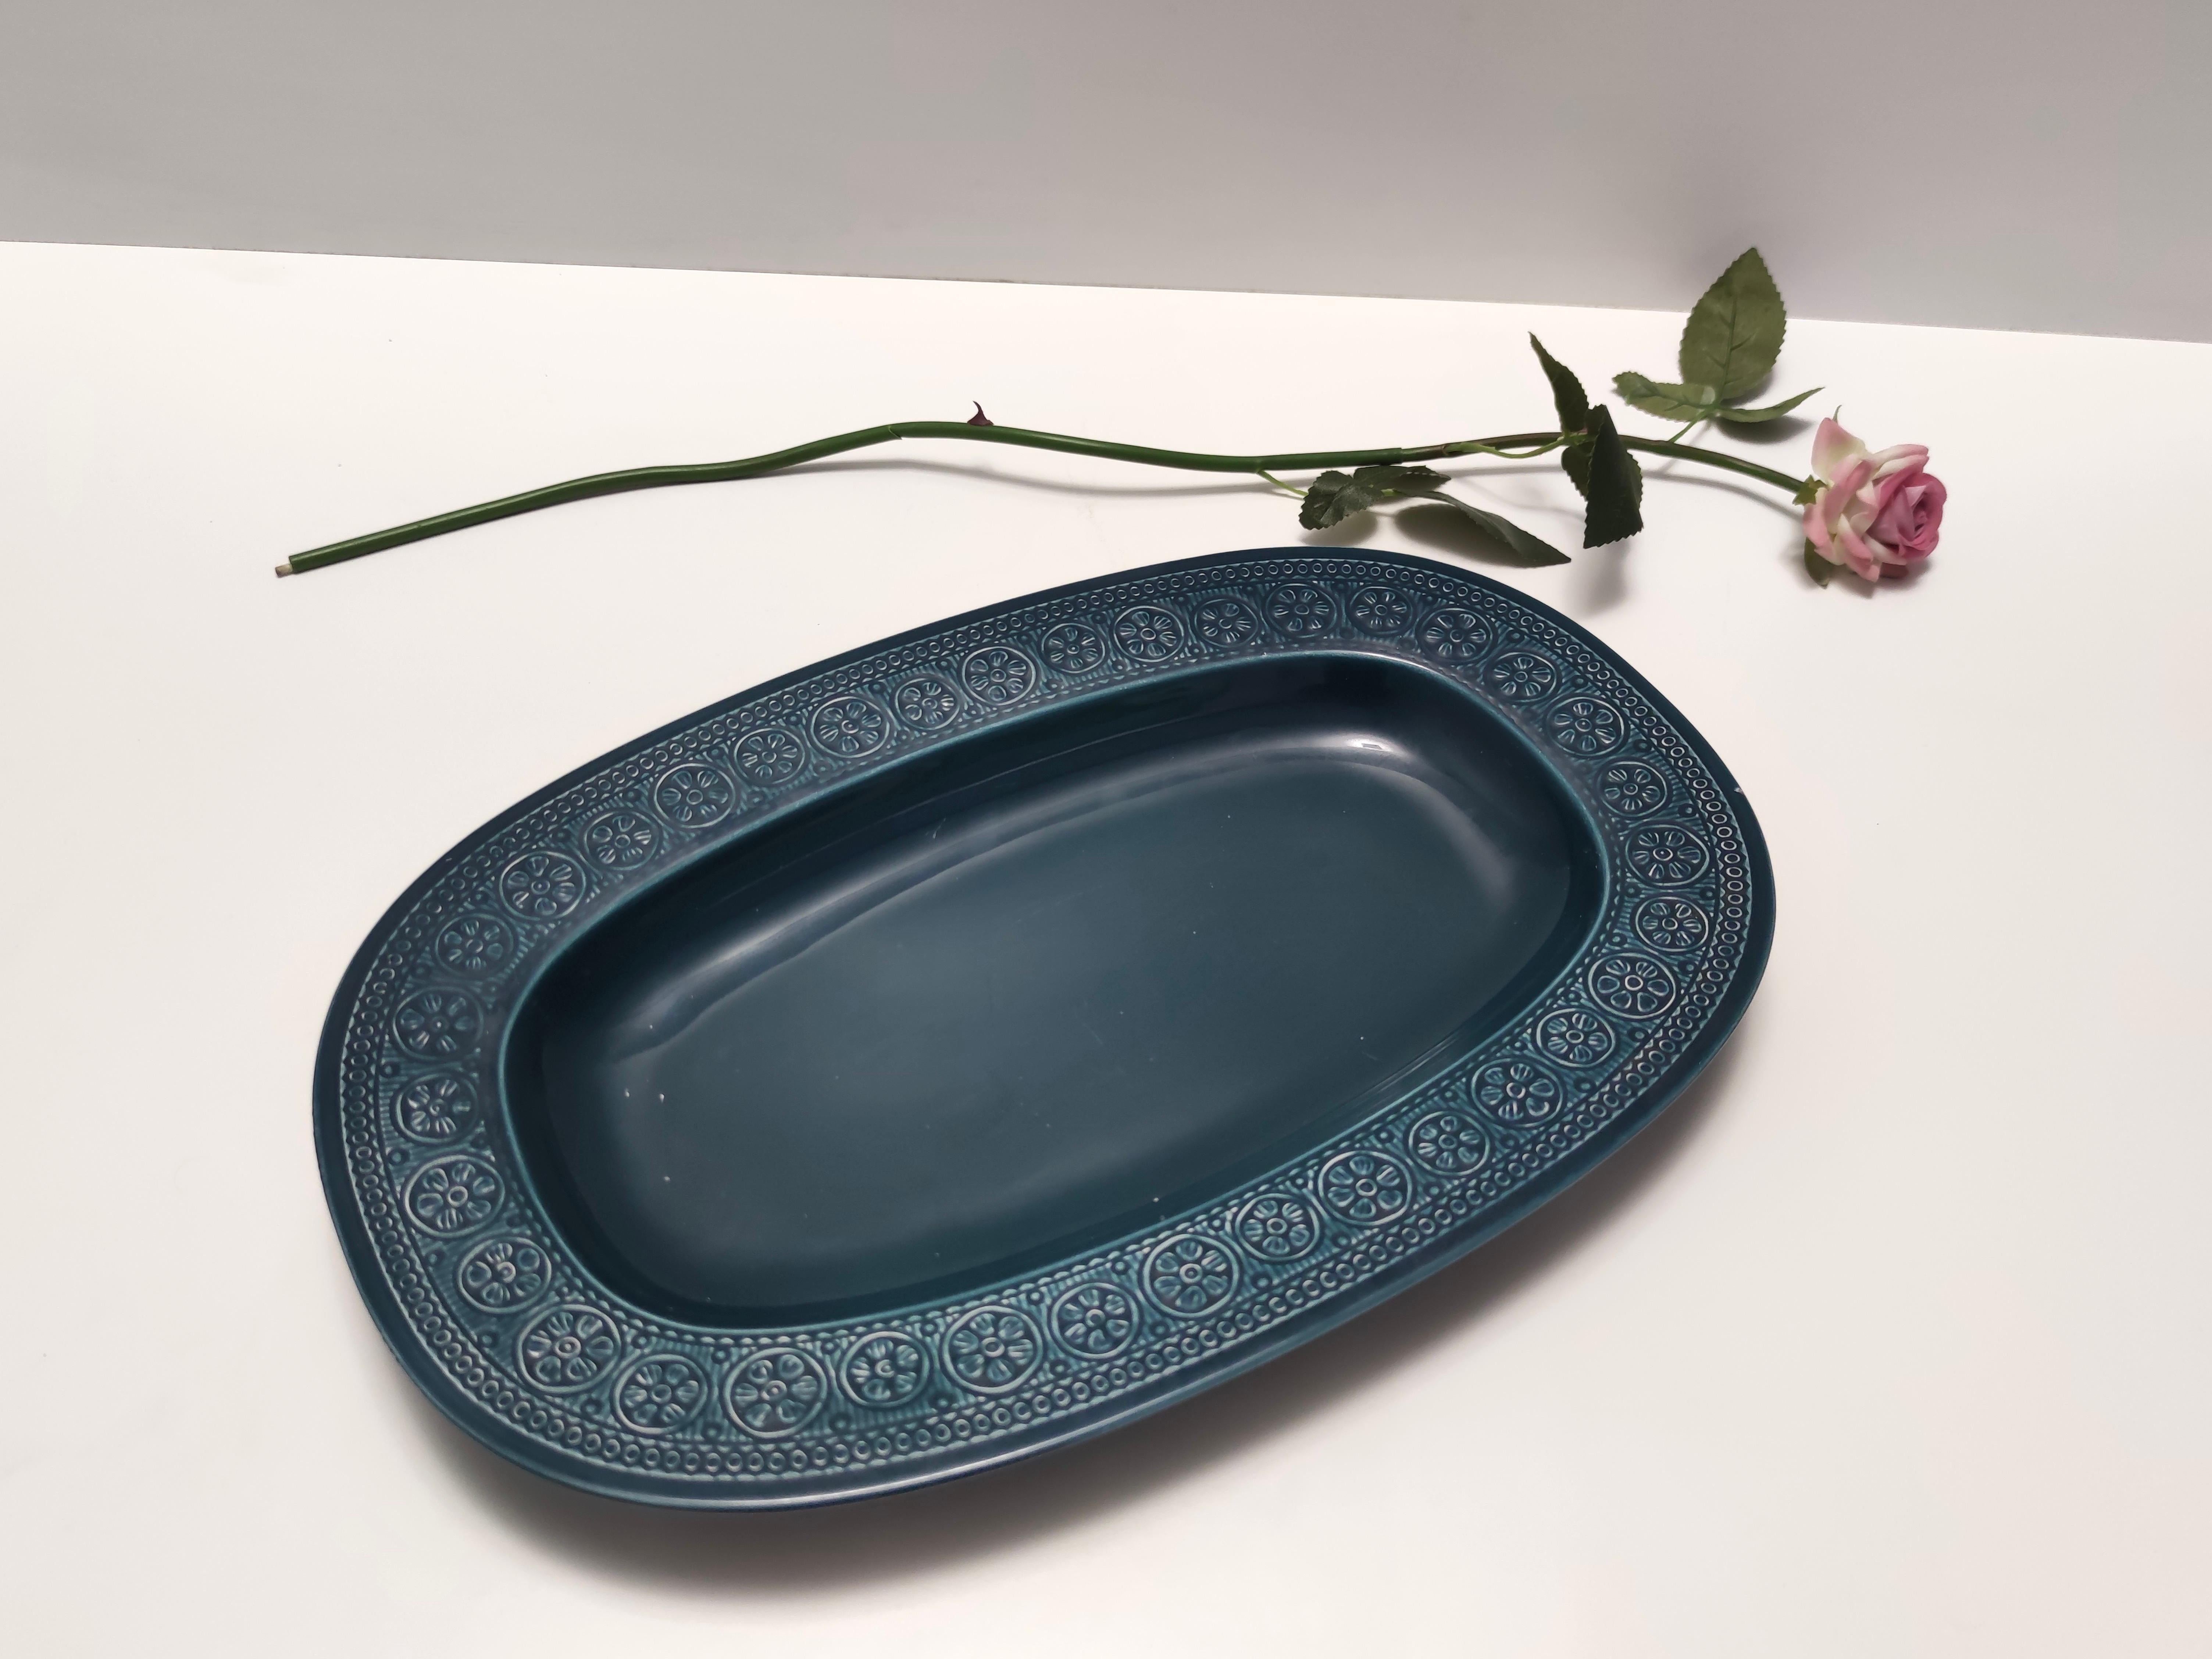 Made in Italy in 1965 by Antonia Campi for Laveno. It is marked on the bottom. 
This tray is made in blue lacquered earthenware with bossed decorations.
It is a vintage item, therefore it might show slight traces of use, but it can be considered as